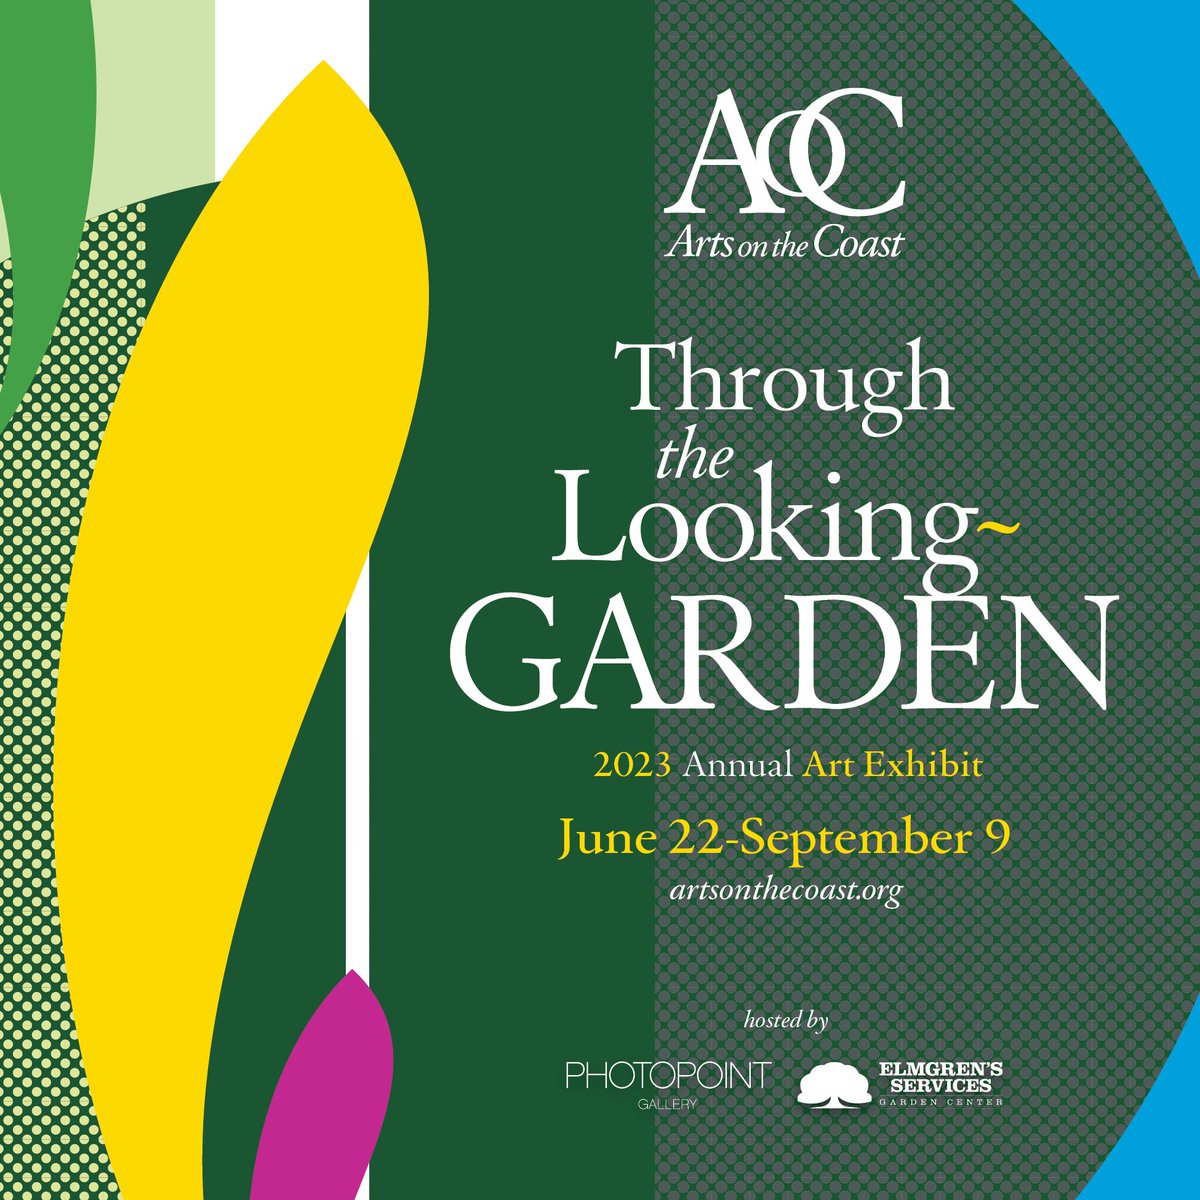 The Arts on the Coast hosts their Annual Exhibit: 'Through the Looking Glass' at the Photopoint Gallery on June 22. Join us as we celebrate the arts in Richmond Hill! #elmgrens #elmgrensservices #richmondhill #artsonthecoast #rhgagardencenter #throughthelookinggarden